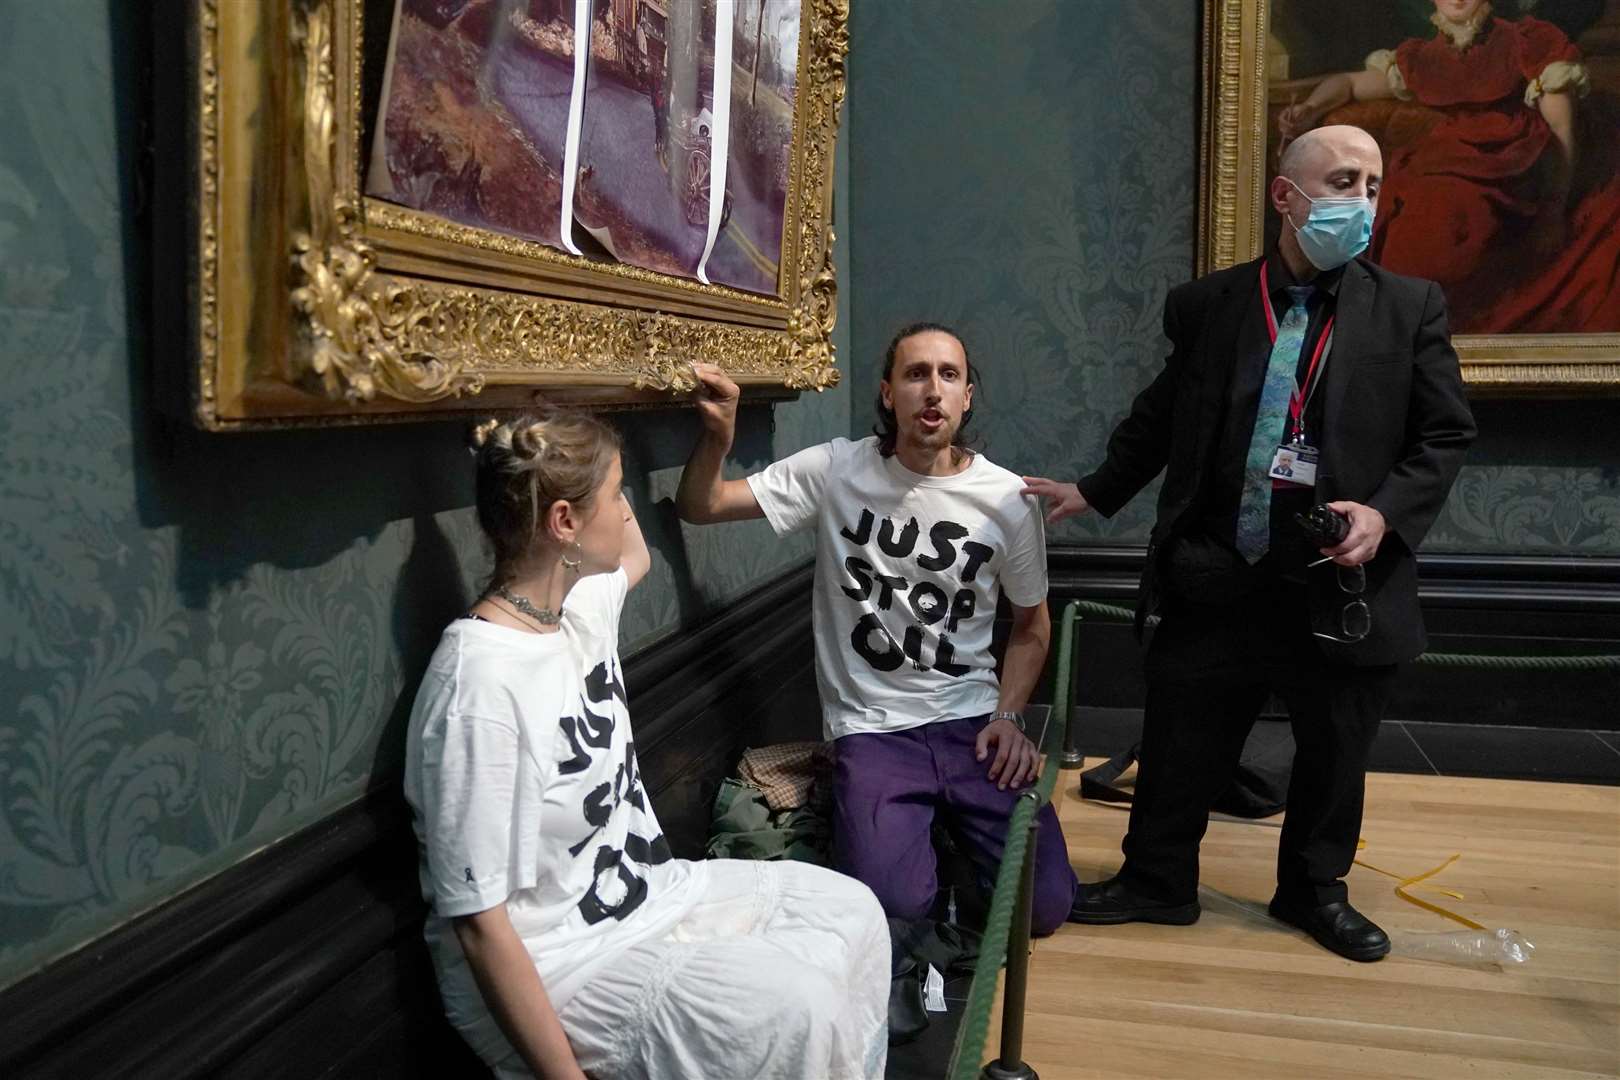 Protesters from Just Stop Oil climate protest group covered John Constable’s The Hay Wain with their own picture inside the National Gallery, London (Kirsty O’Connor/PA)